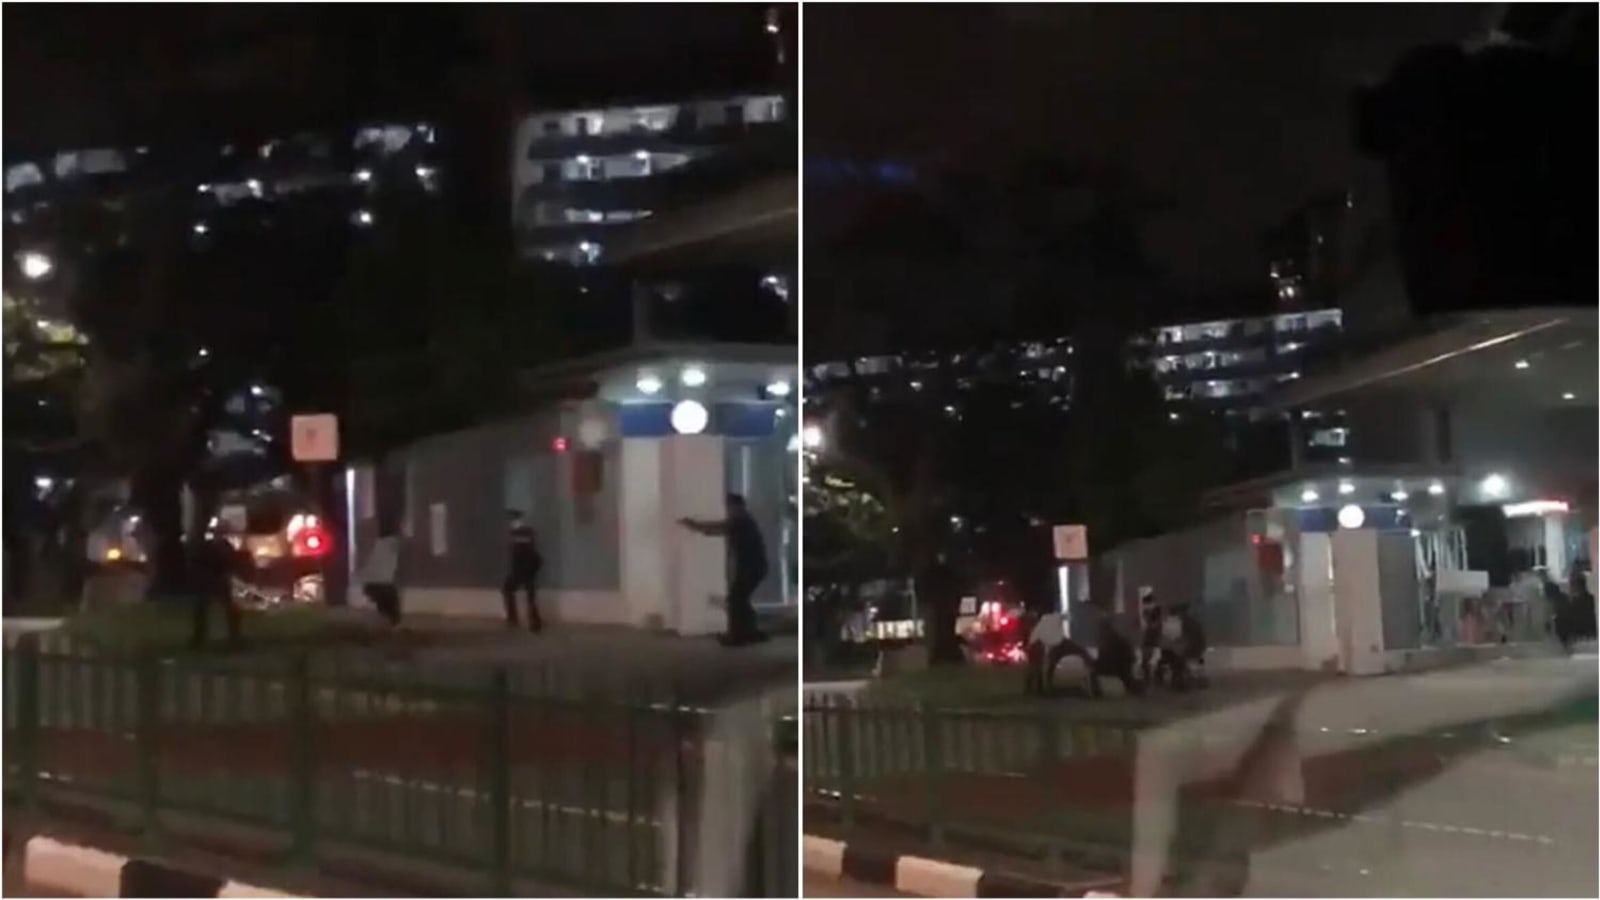 Knife-wielding man arrested after charging police officers at Clementi police centre